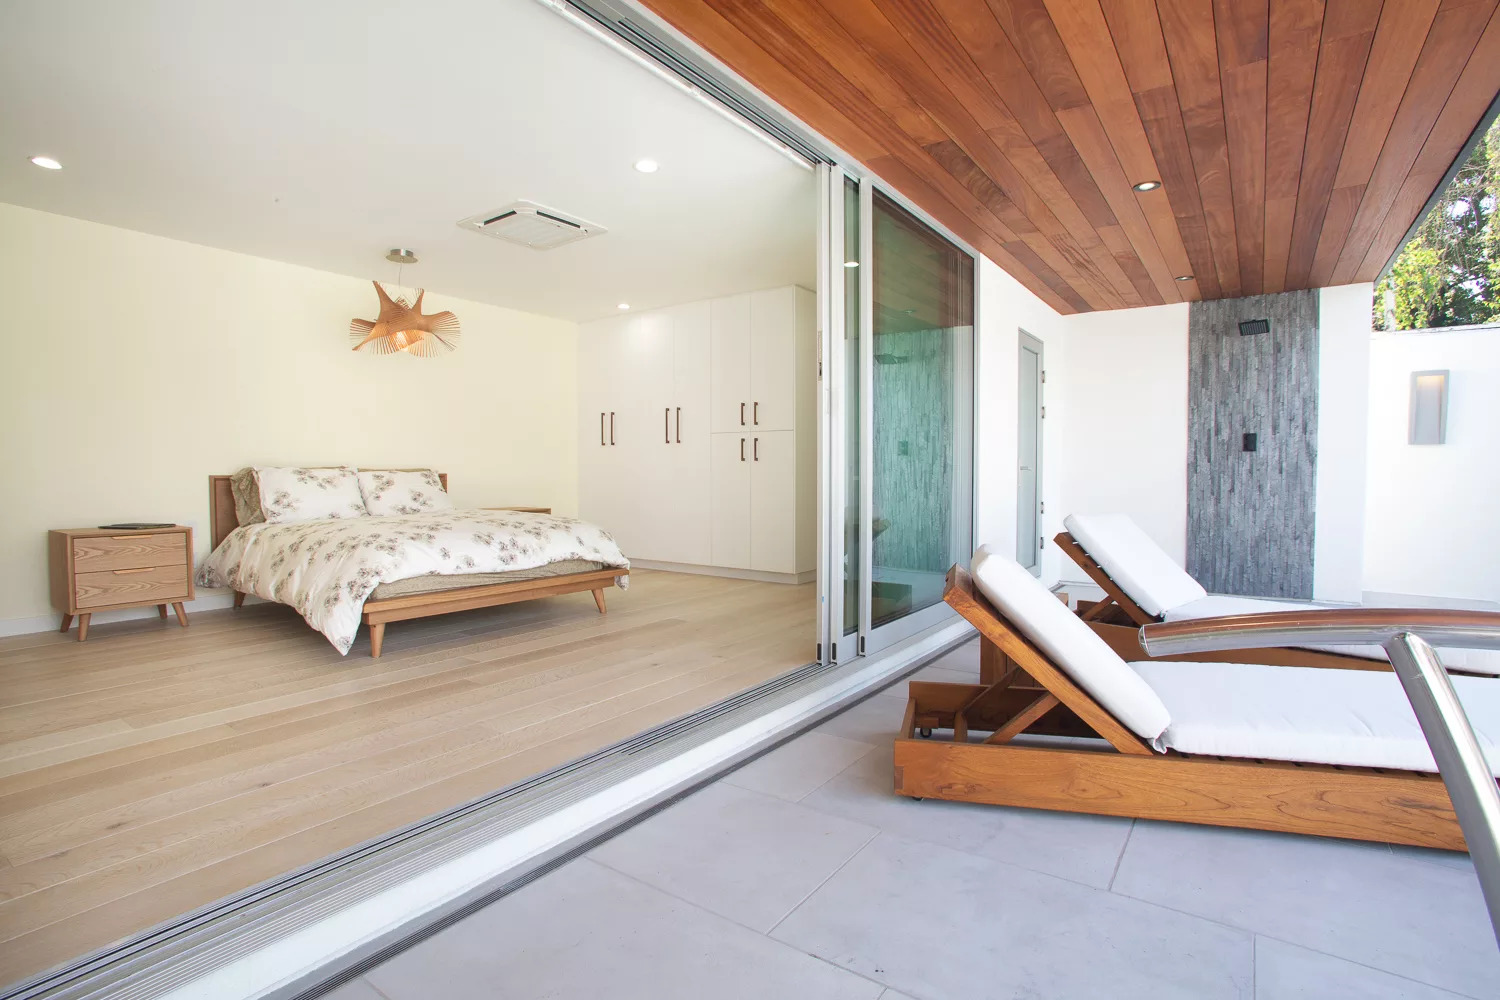 Poolside room with custom glass sliding doors opening up to lounge chairs next to the pool and an outdoor shower.